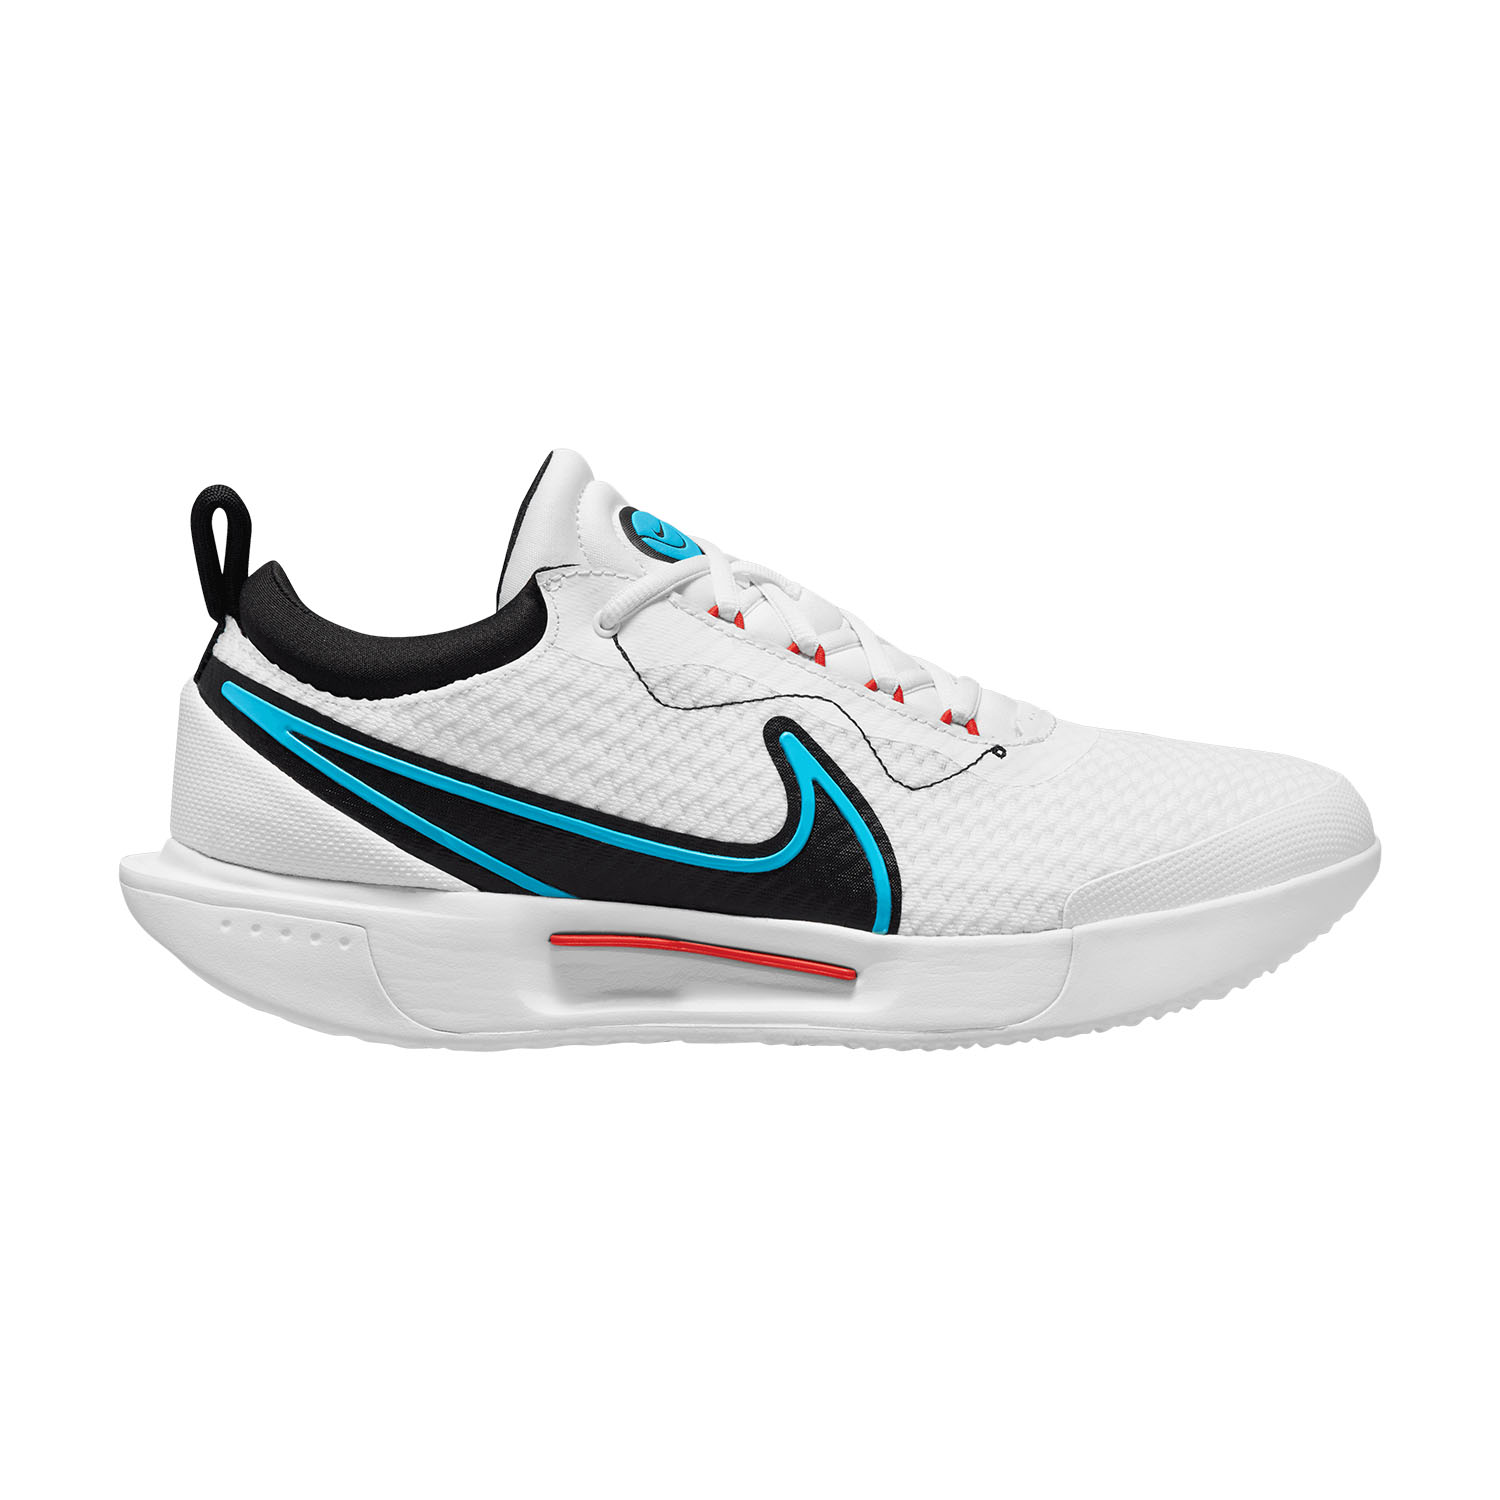 Nike Court Zoom Pro HC - White/Black/Baltic Blue/Picante Red